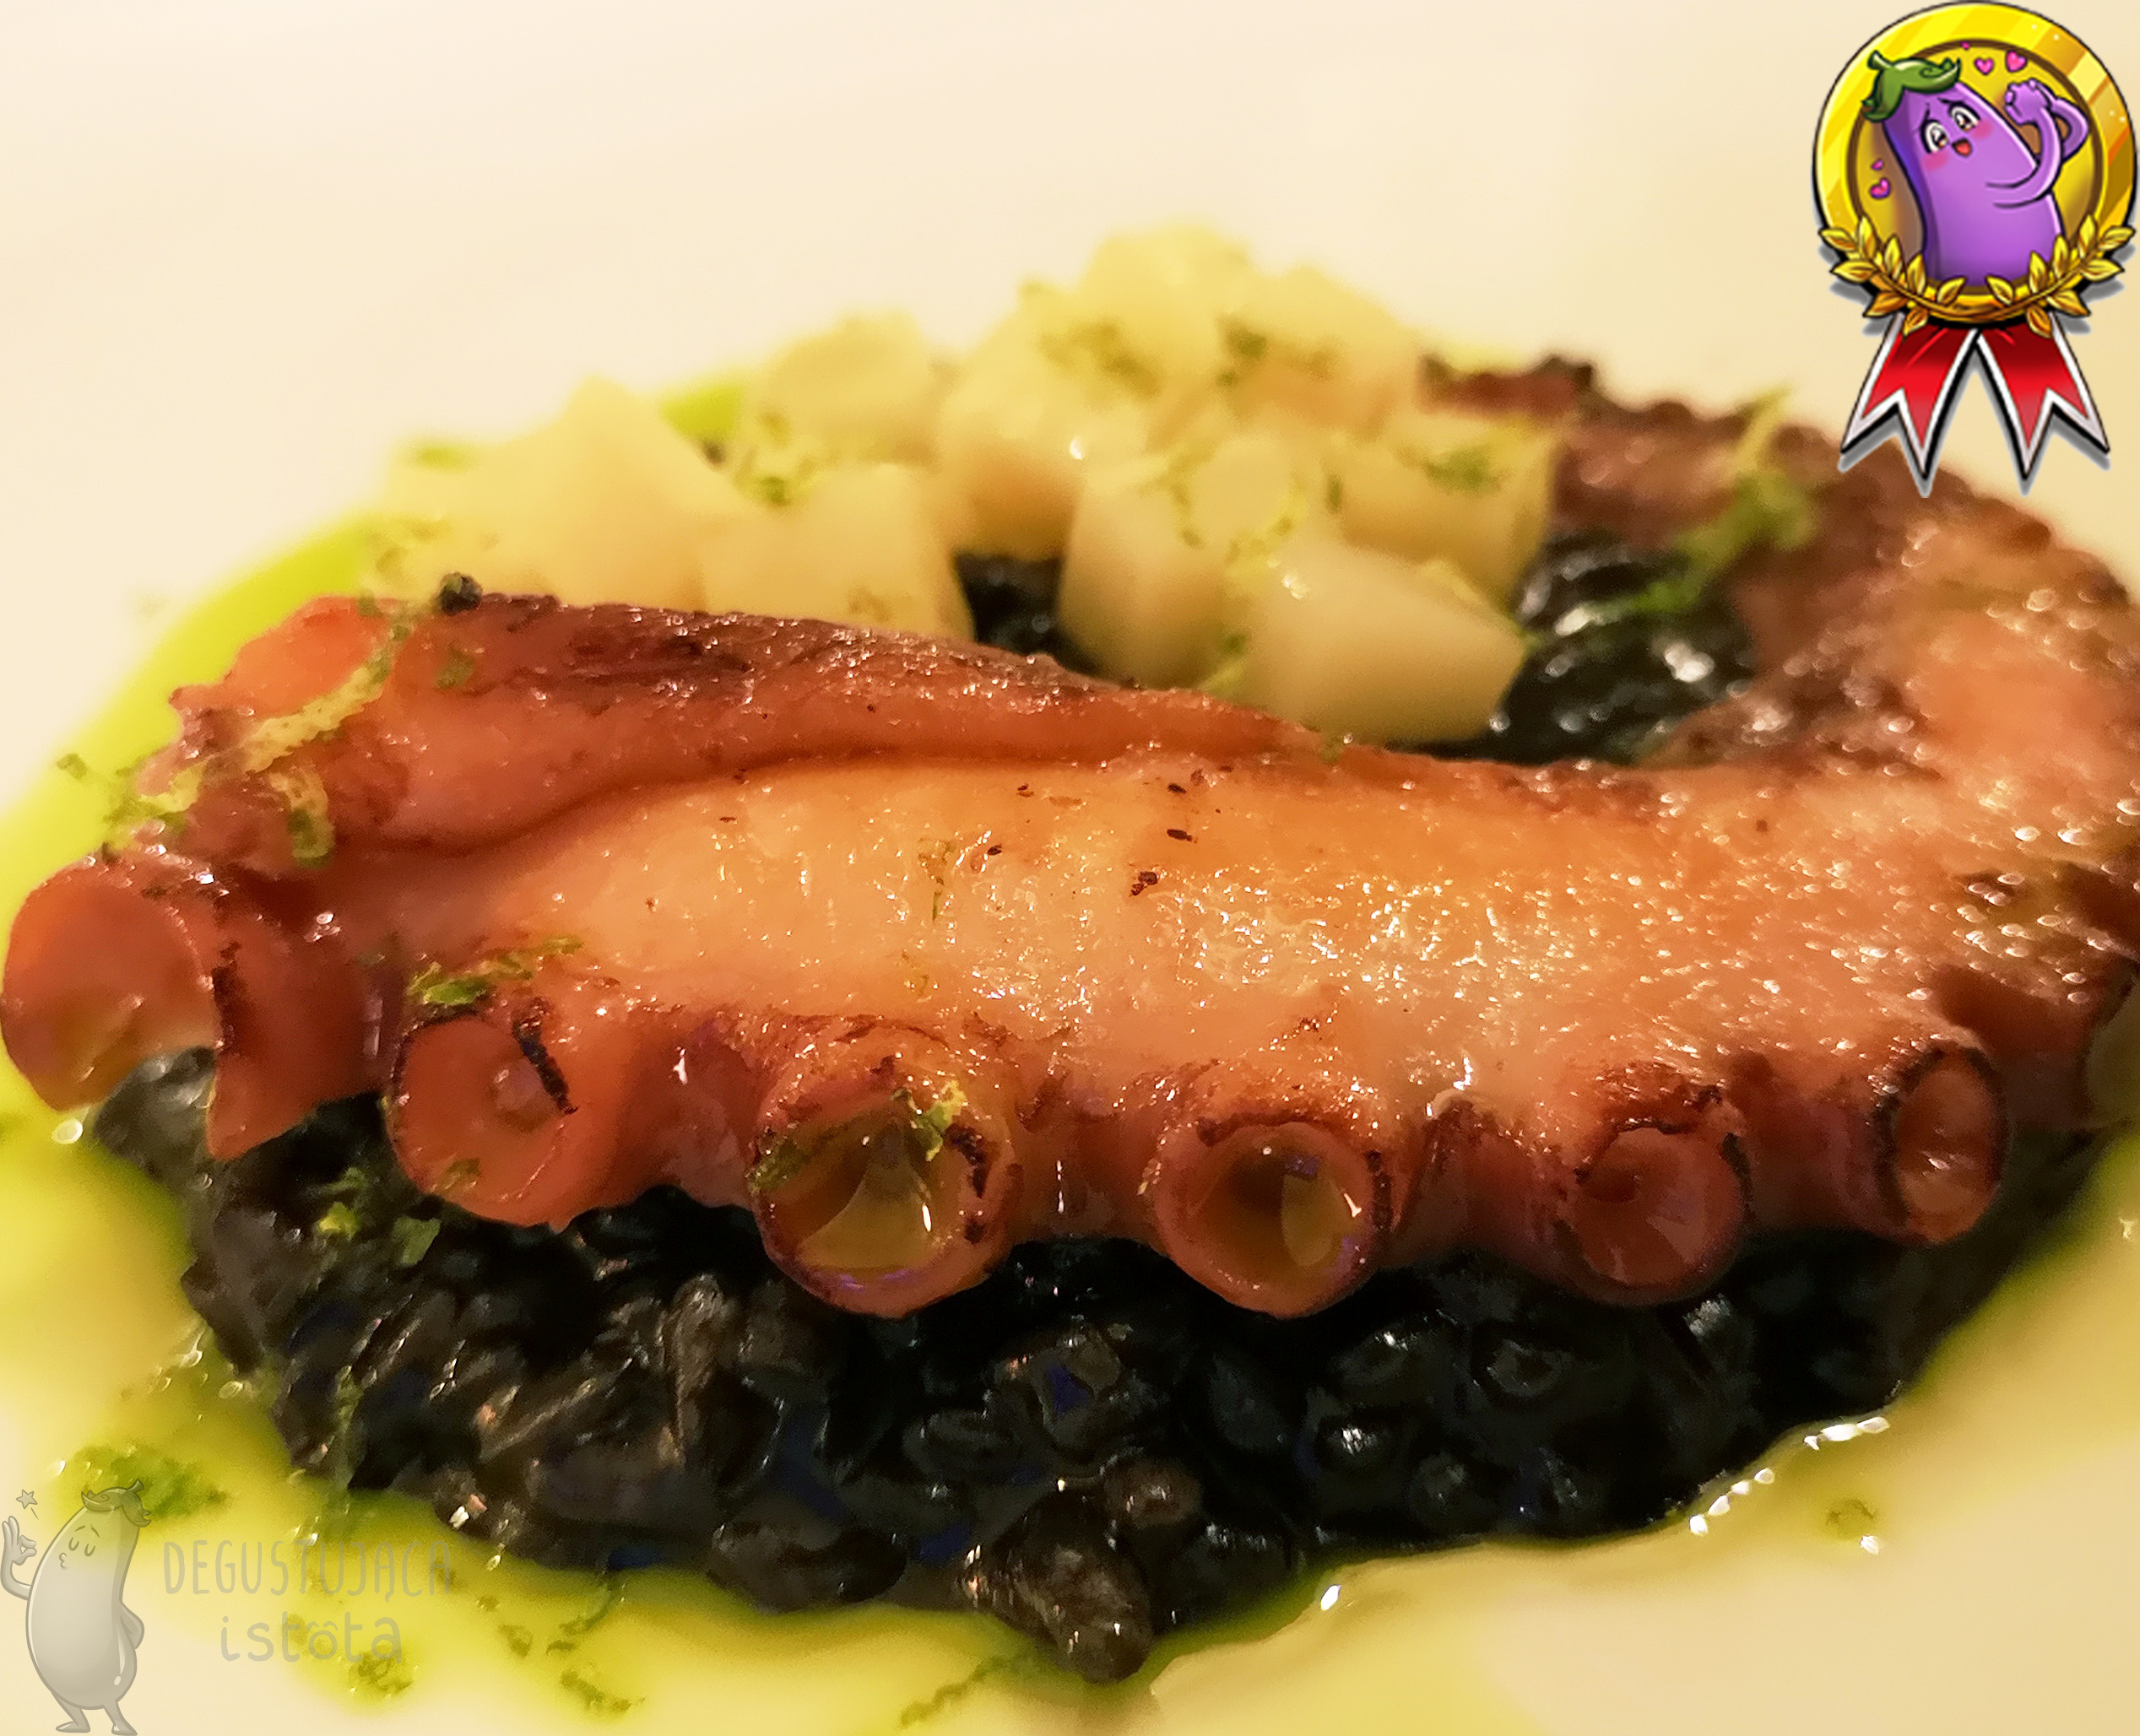 Tentacle of octopus on a black risotto. Around it is green olive oil and diced parsley root